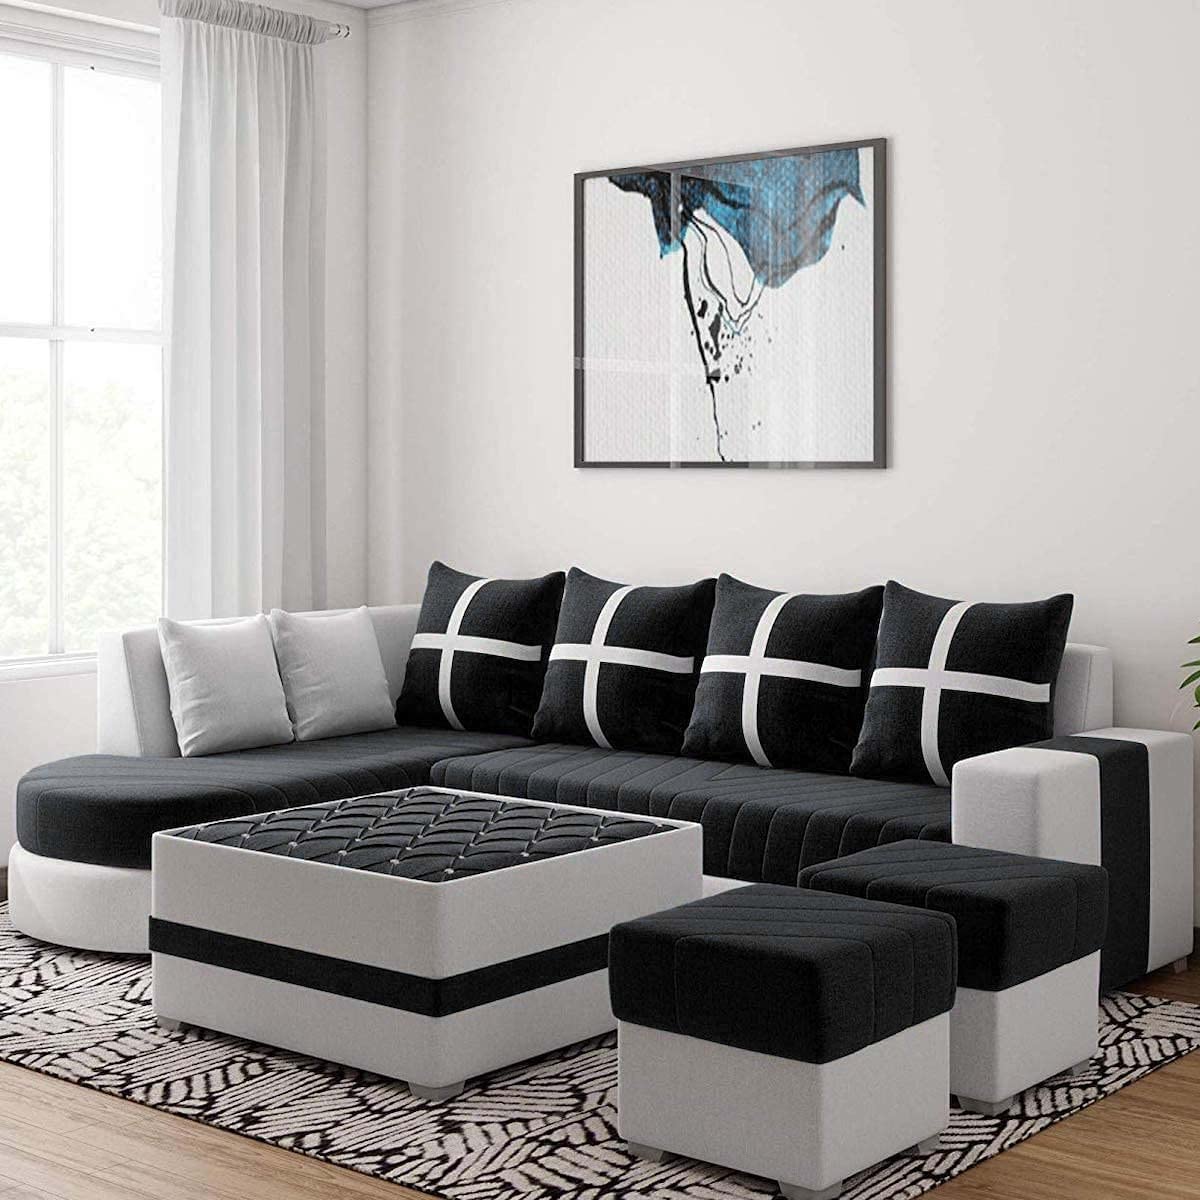 Torque India Dalton L Shape 8 Seater Sofa Set with Centre Table and 2 Puffy (LHS/ RHS) - Torque India